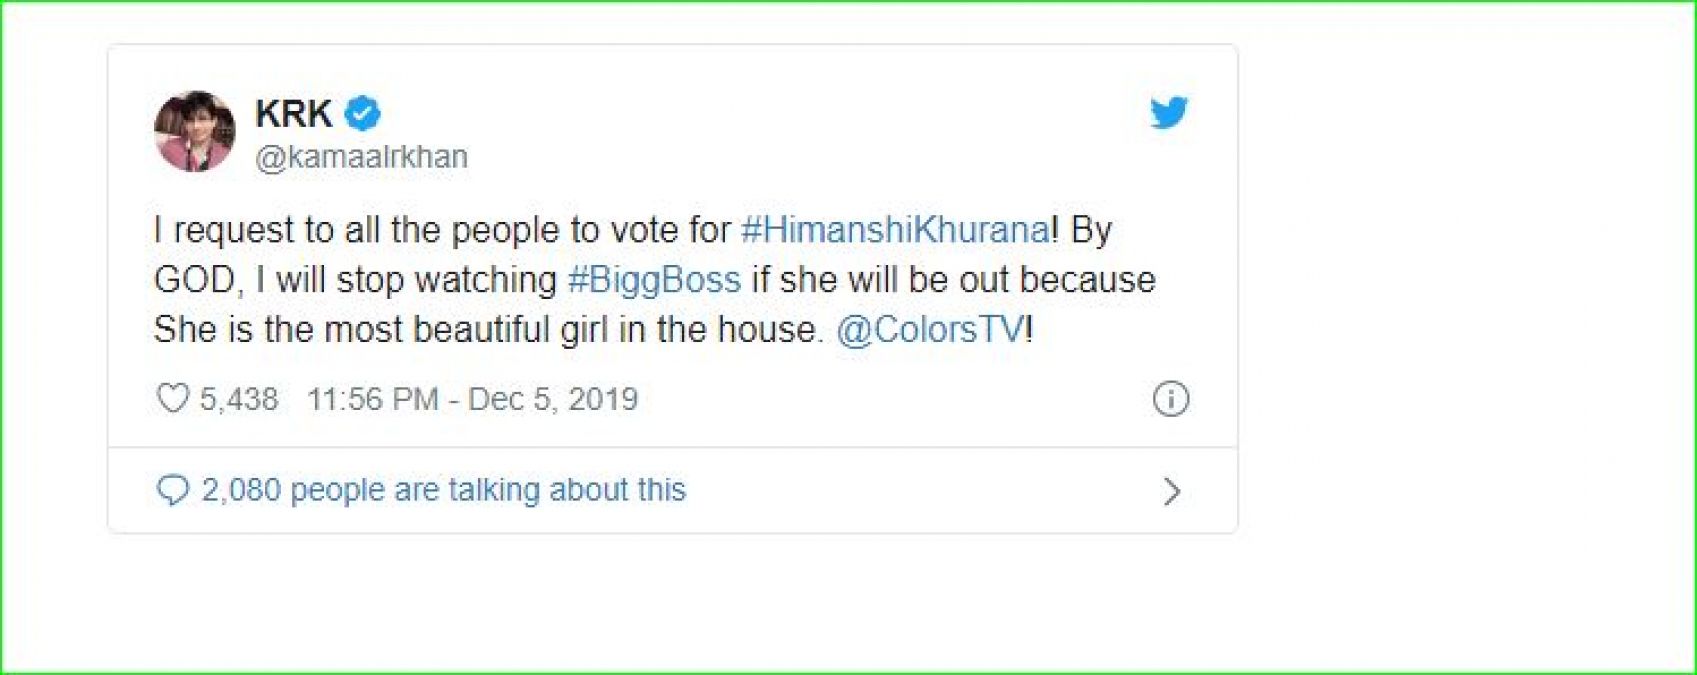 This Khan considers Himanshi Khurana as the most beautiful, says 'If she is evicted...